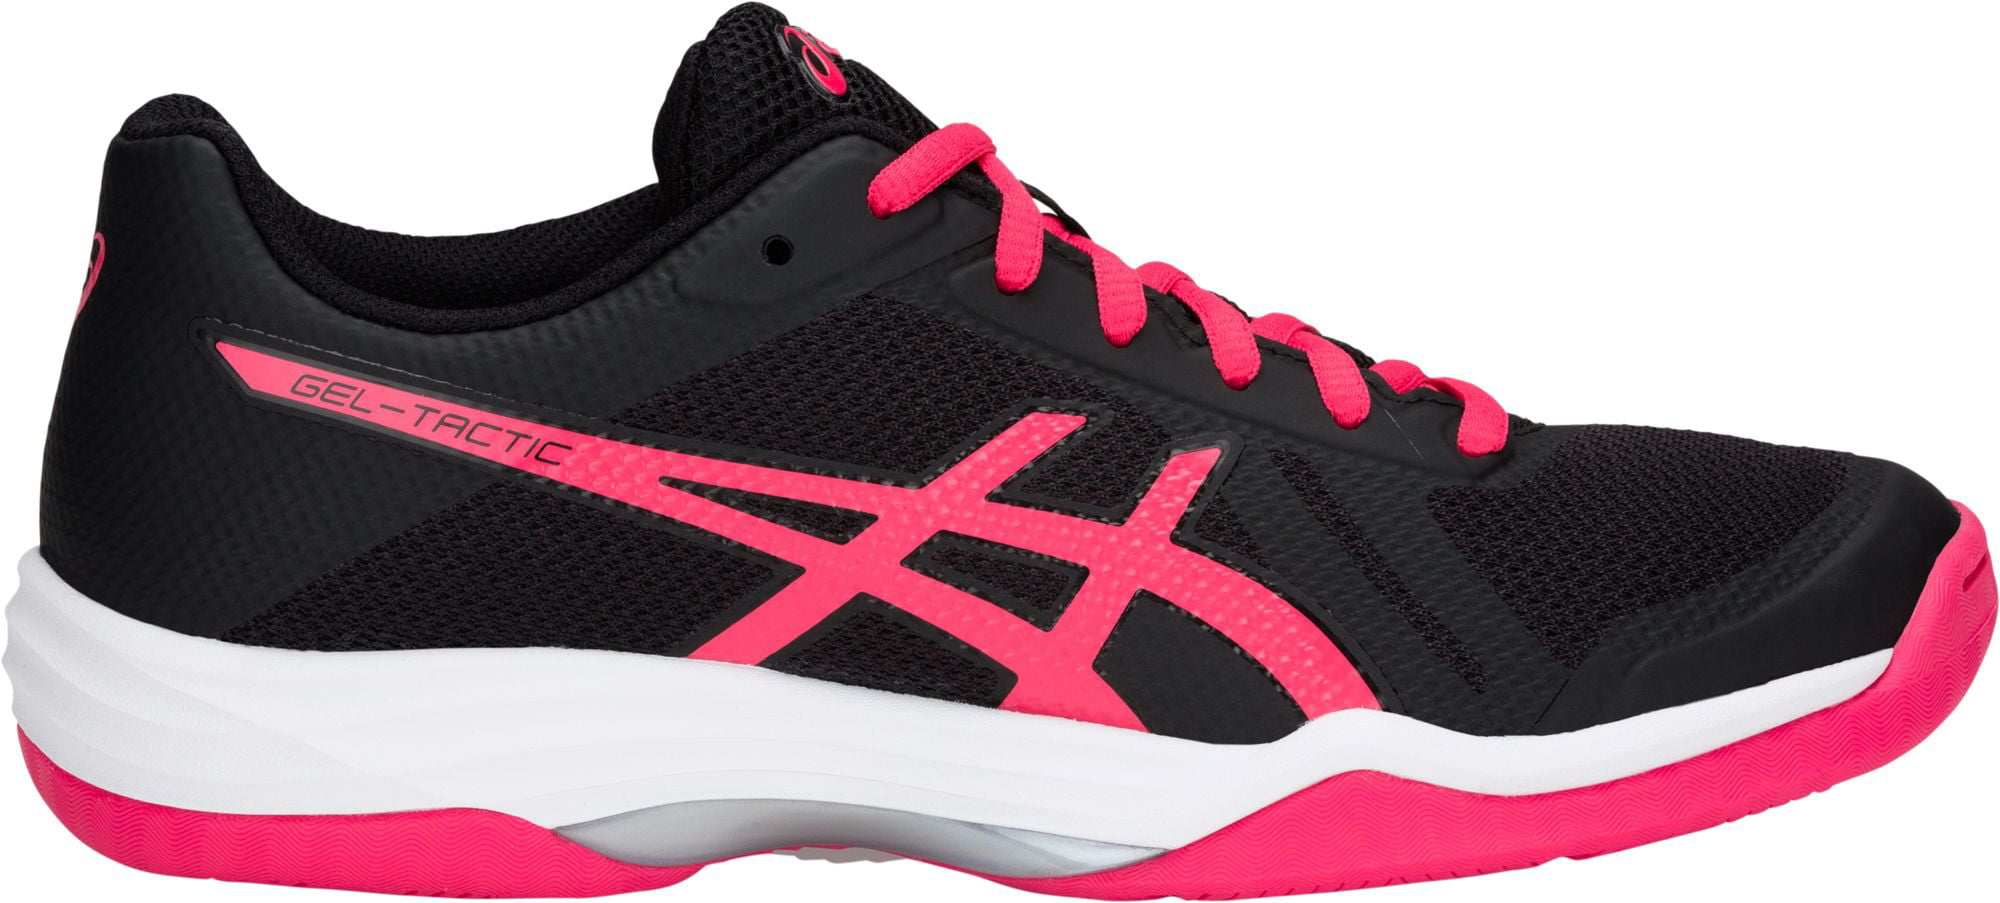 ASICS Women's GelTactic 2 Volleyball Shoes